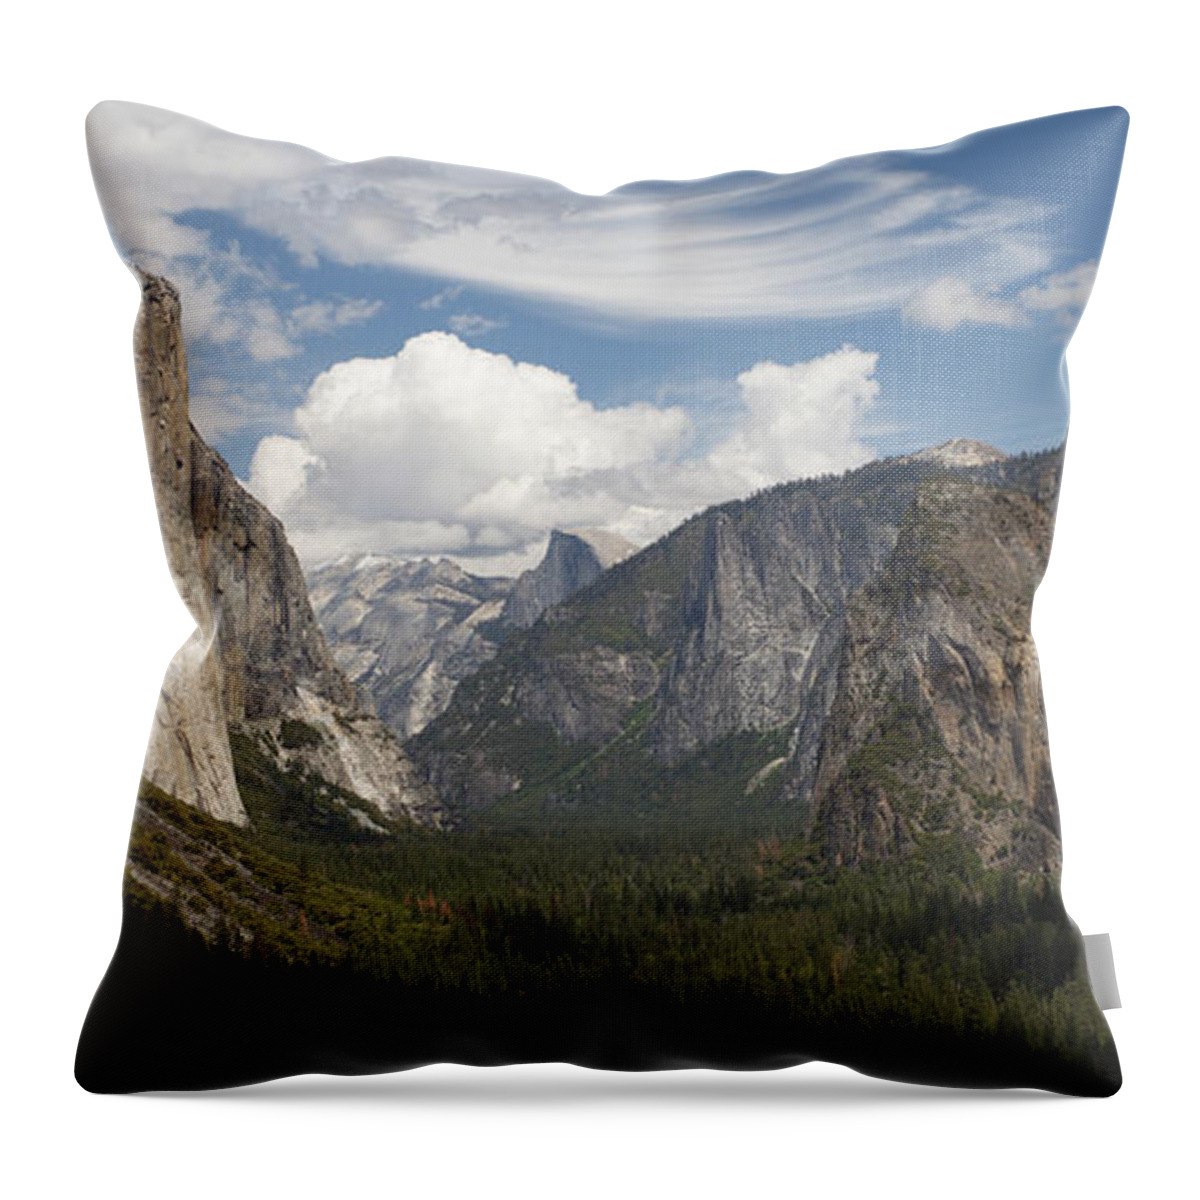 California Throw Pillow featuring the photograph Yosemite Valley - Tunnel View by Harold Rau